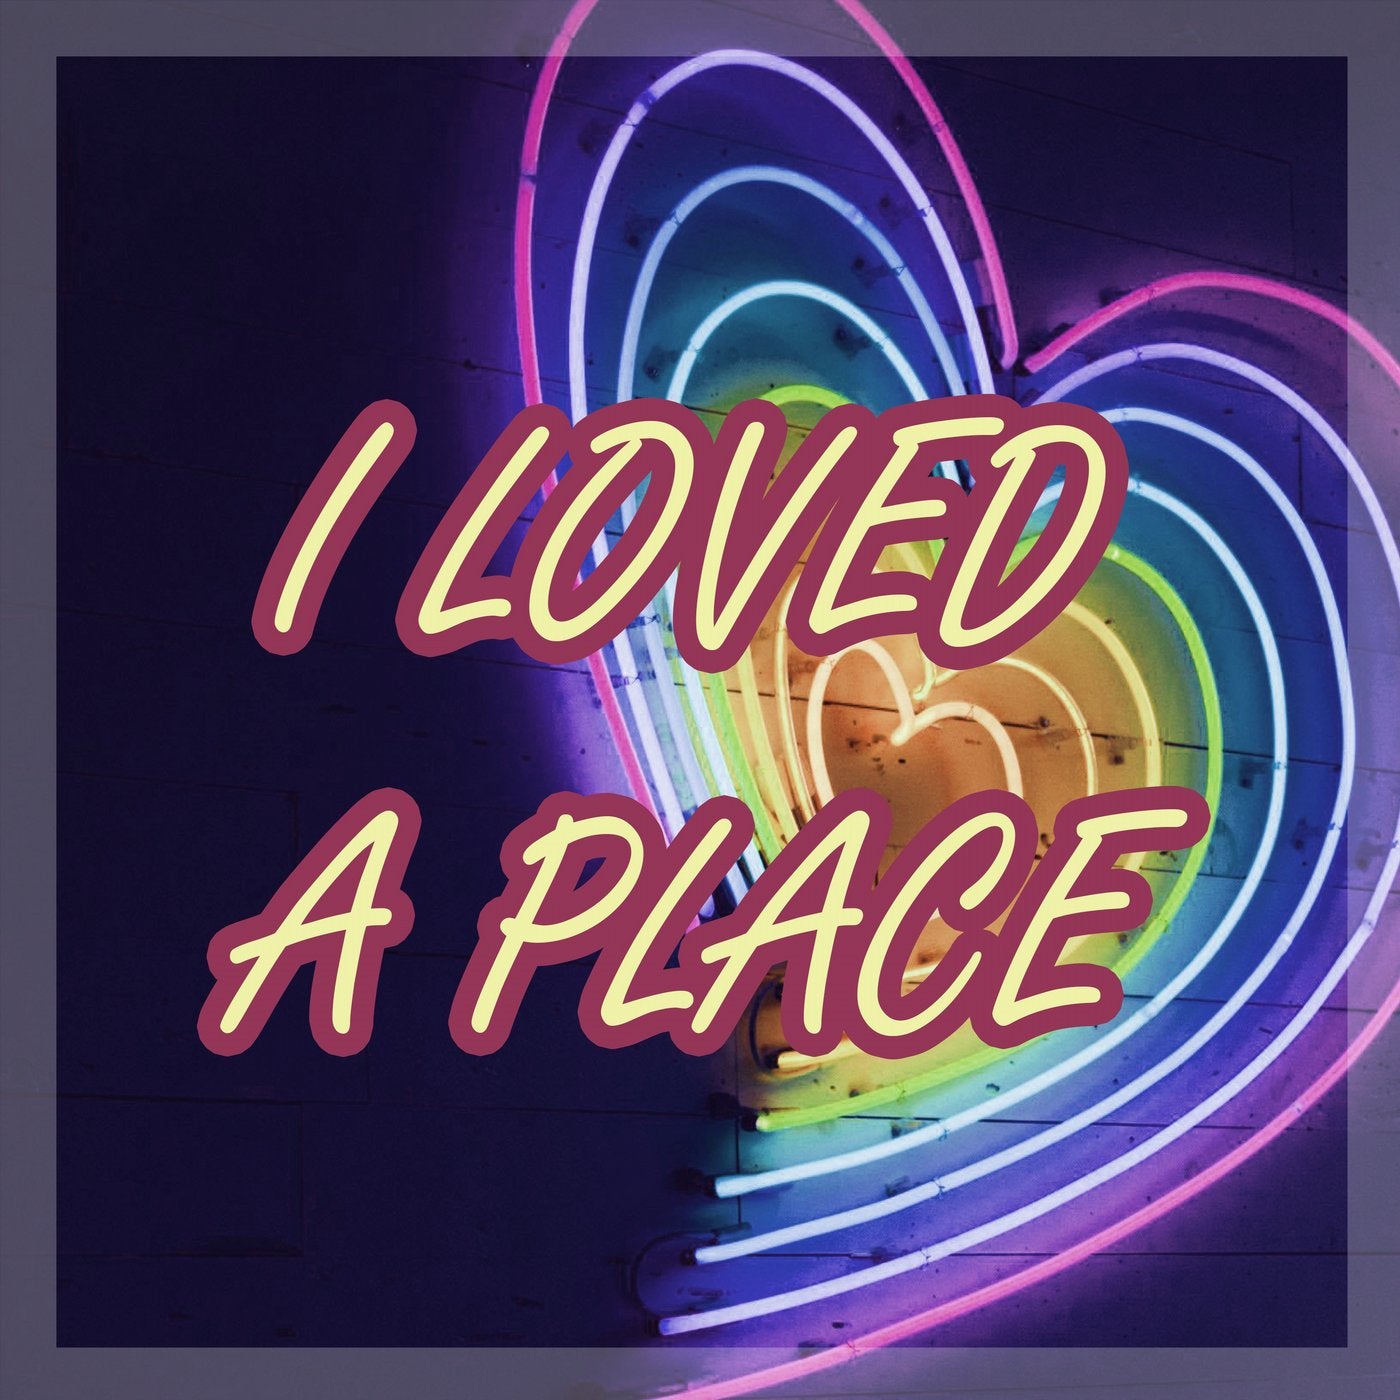 I Loved A Place